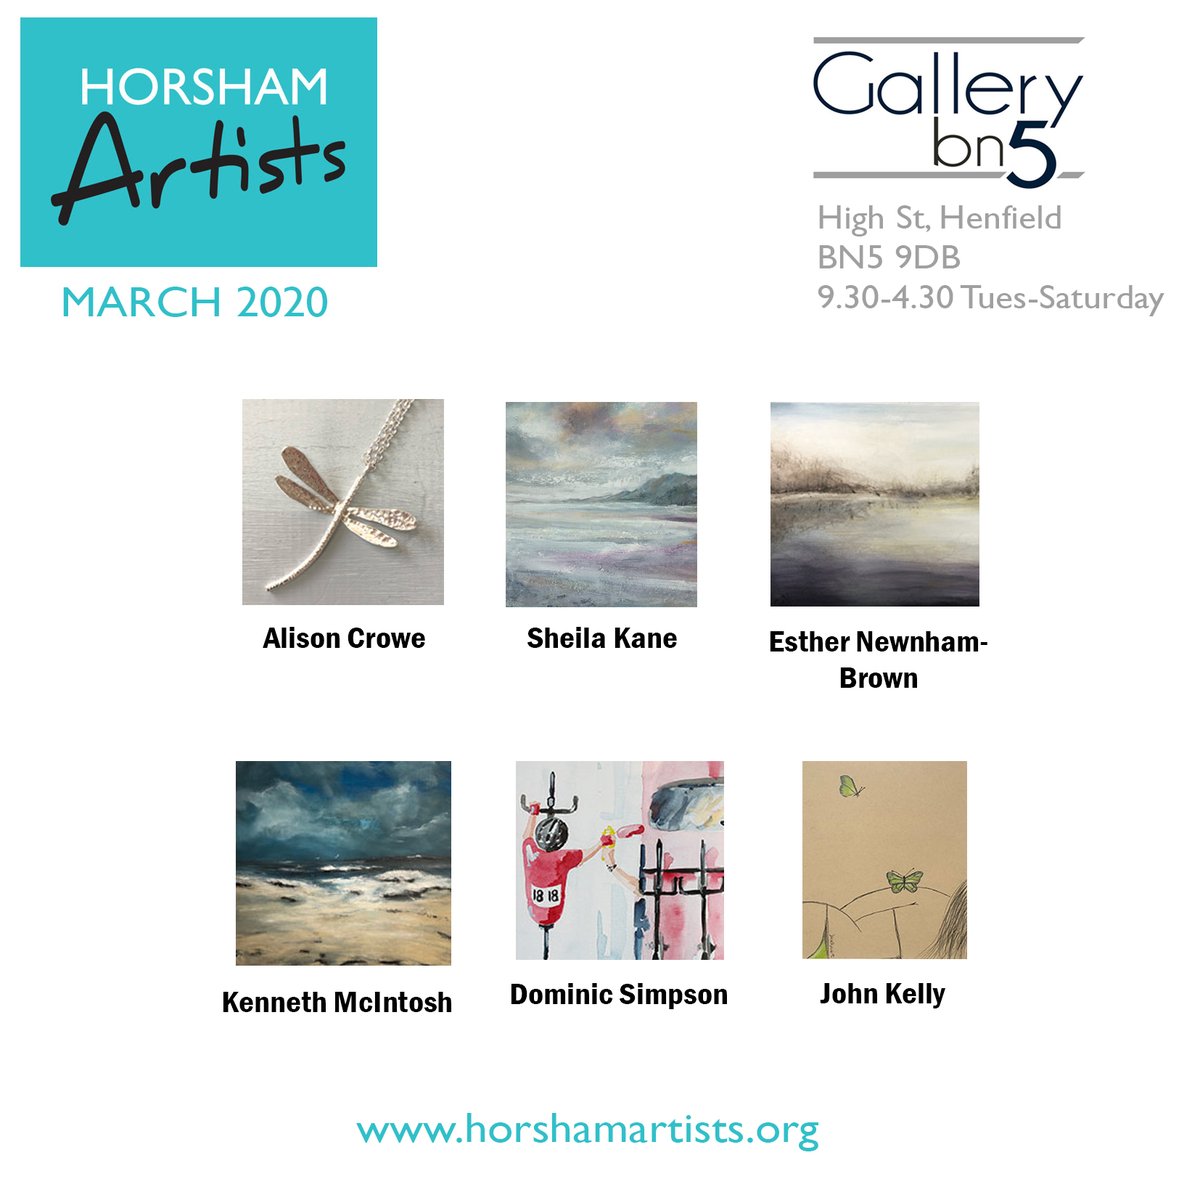 Horsham Artists at Gallery BN5 this March.
More info gallerybn5.co.uk
#horshamartists #horsham #horshamart #galleryBN5